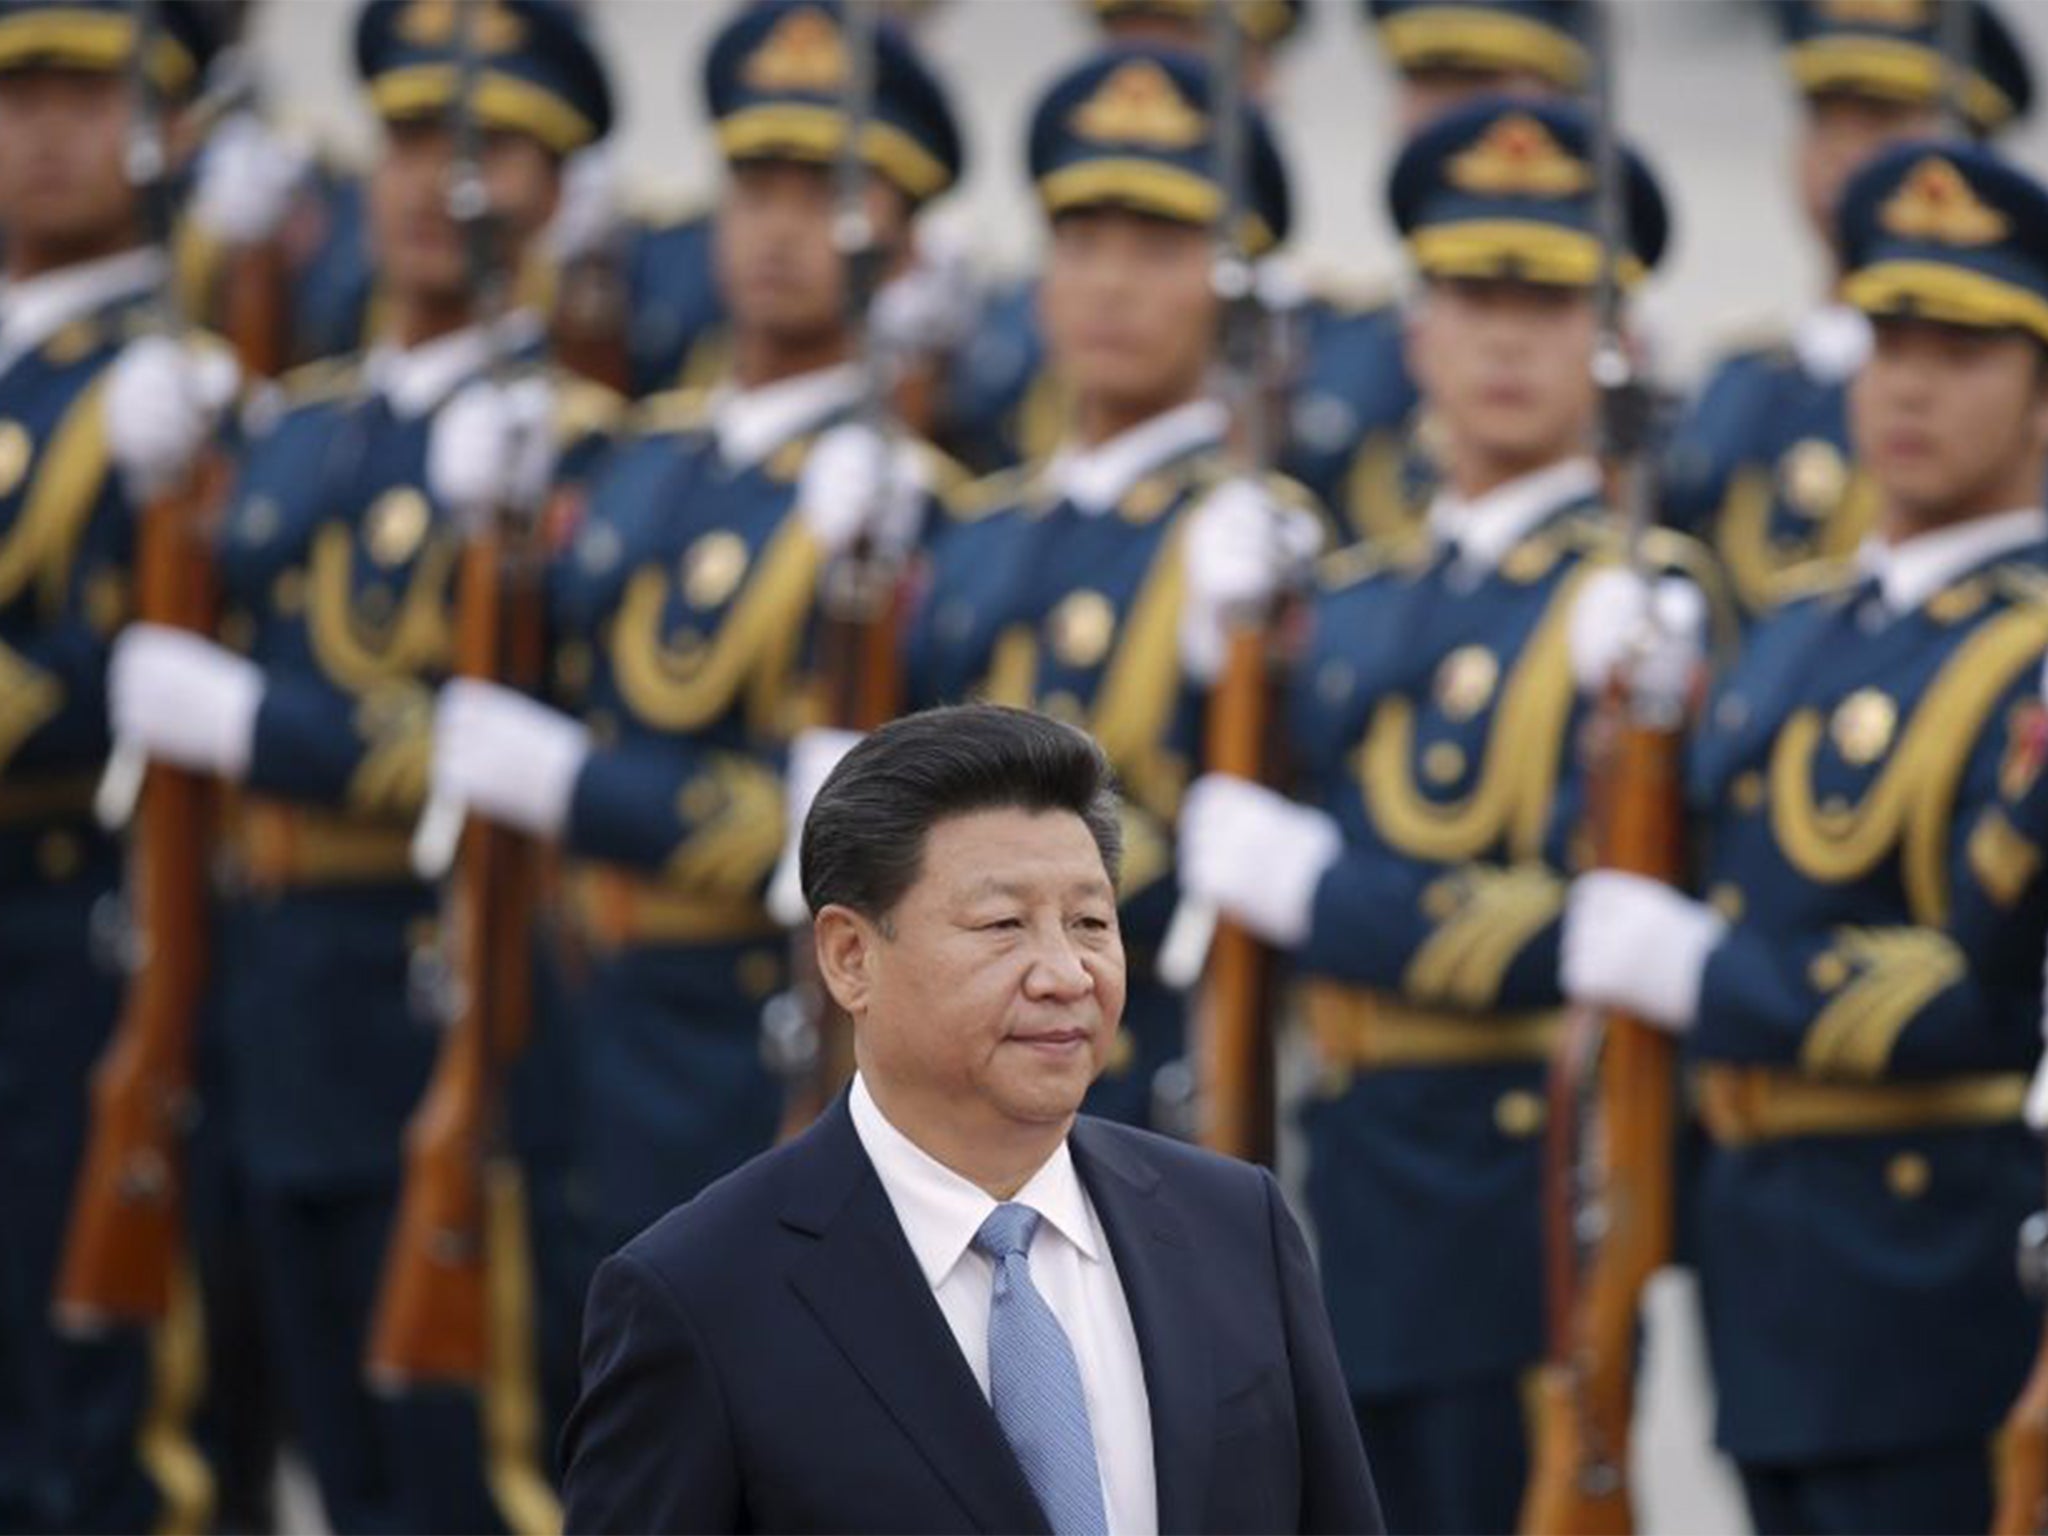 China's President Xi Jinping inspects honour guards during a welcoming ceremony outside the Great Hall of the People in Beijing, China.